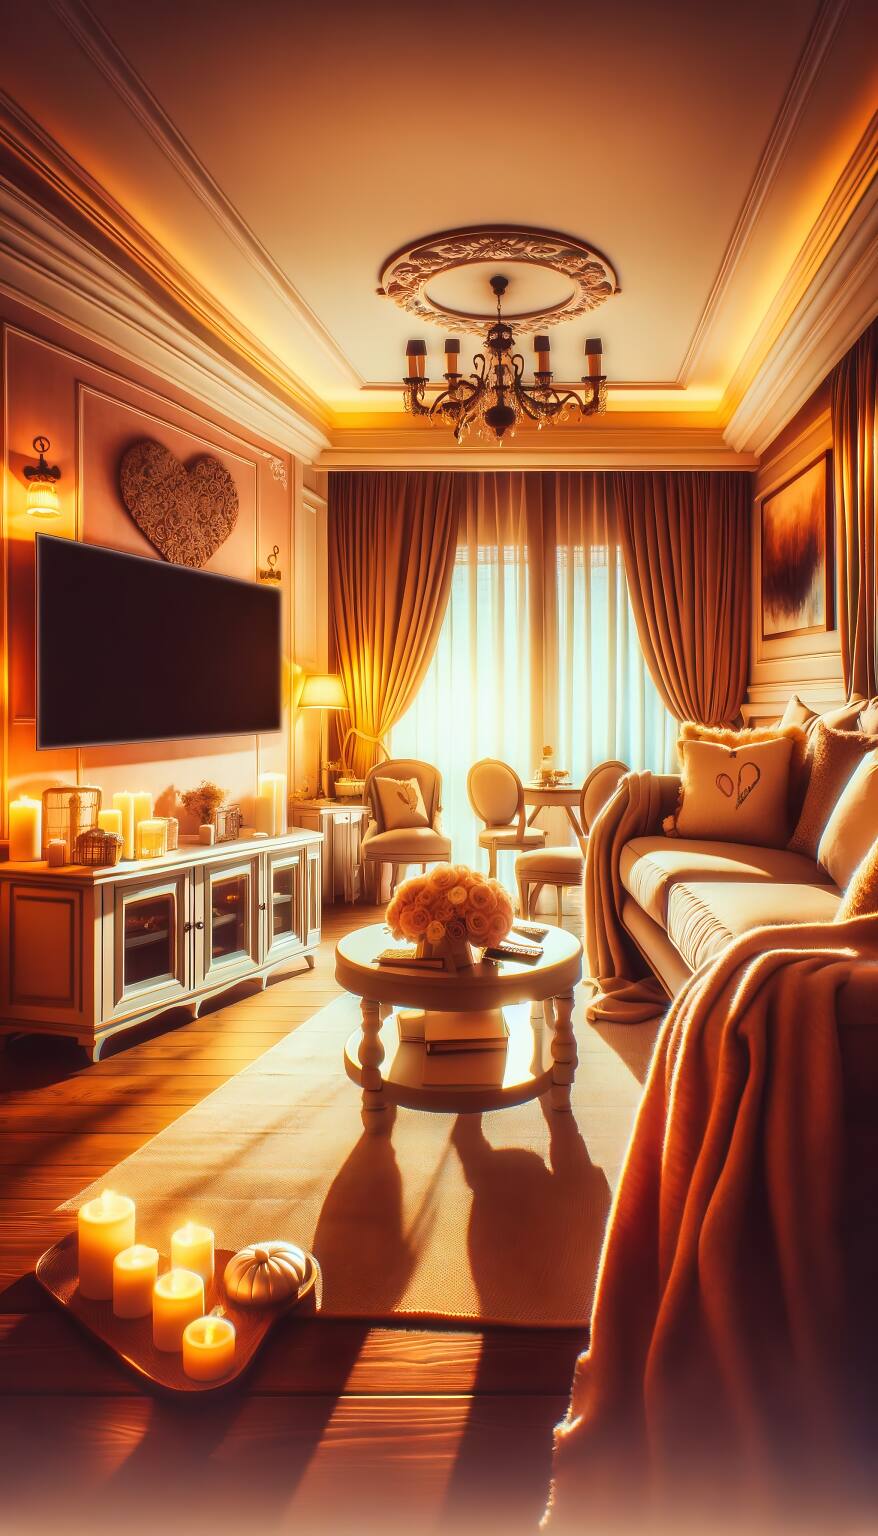 A Romantic Living Room In Warm, Inviting Hues, Featuring A Comfortable Sofa And A Flat-Screen Tv, Creating An Atmosphere Of Relaxed, Cozy Charm.